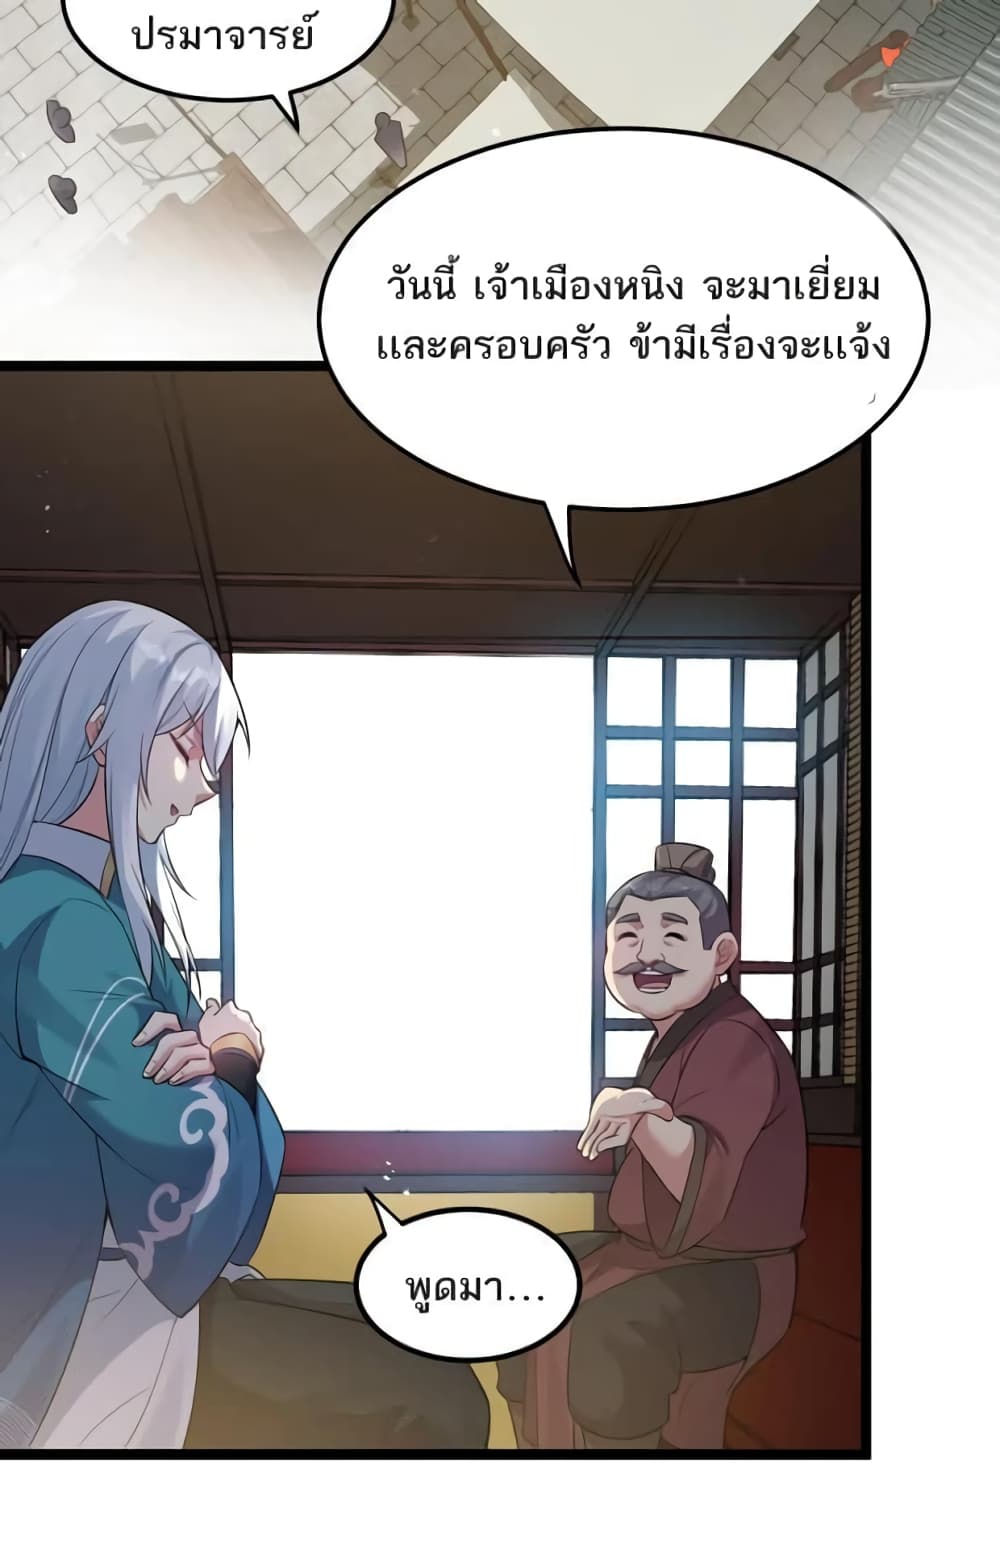 Godsian Masian from Another World ตอนที่ 101 (2)